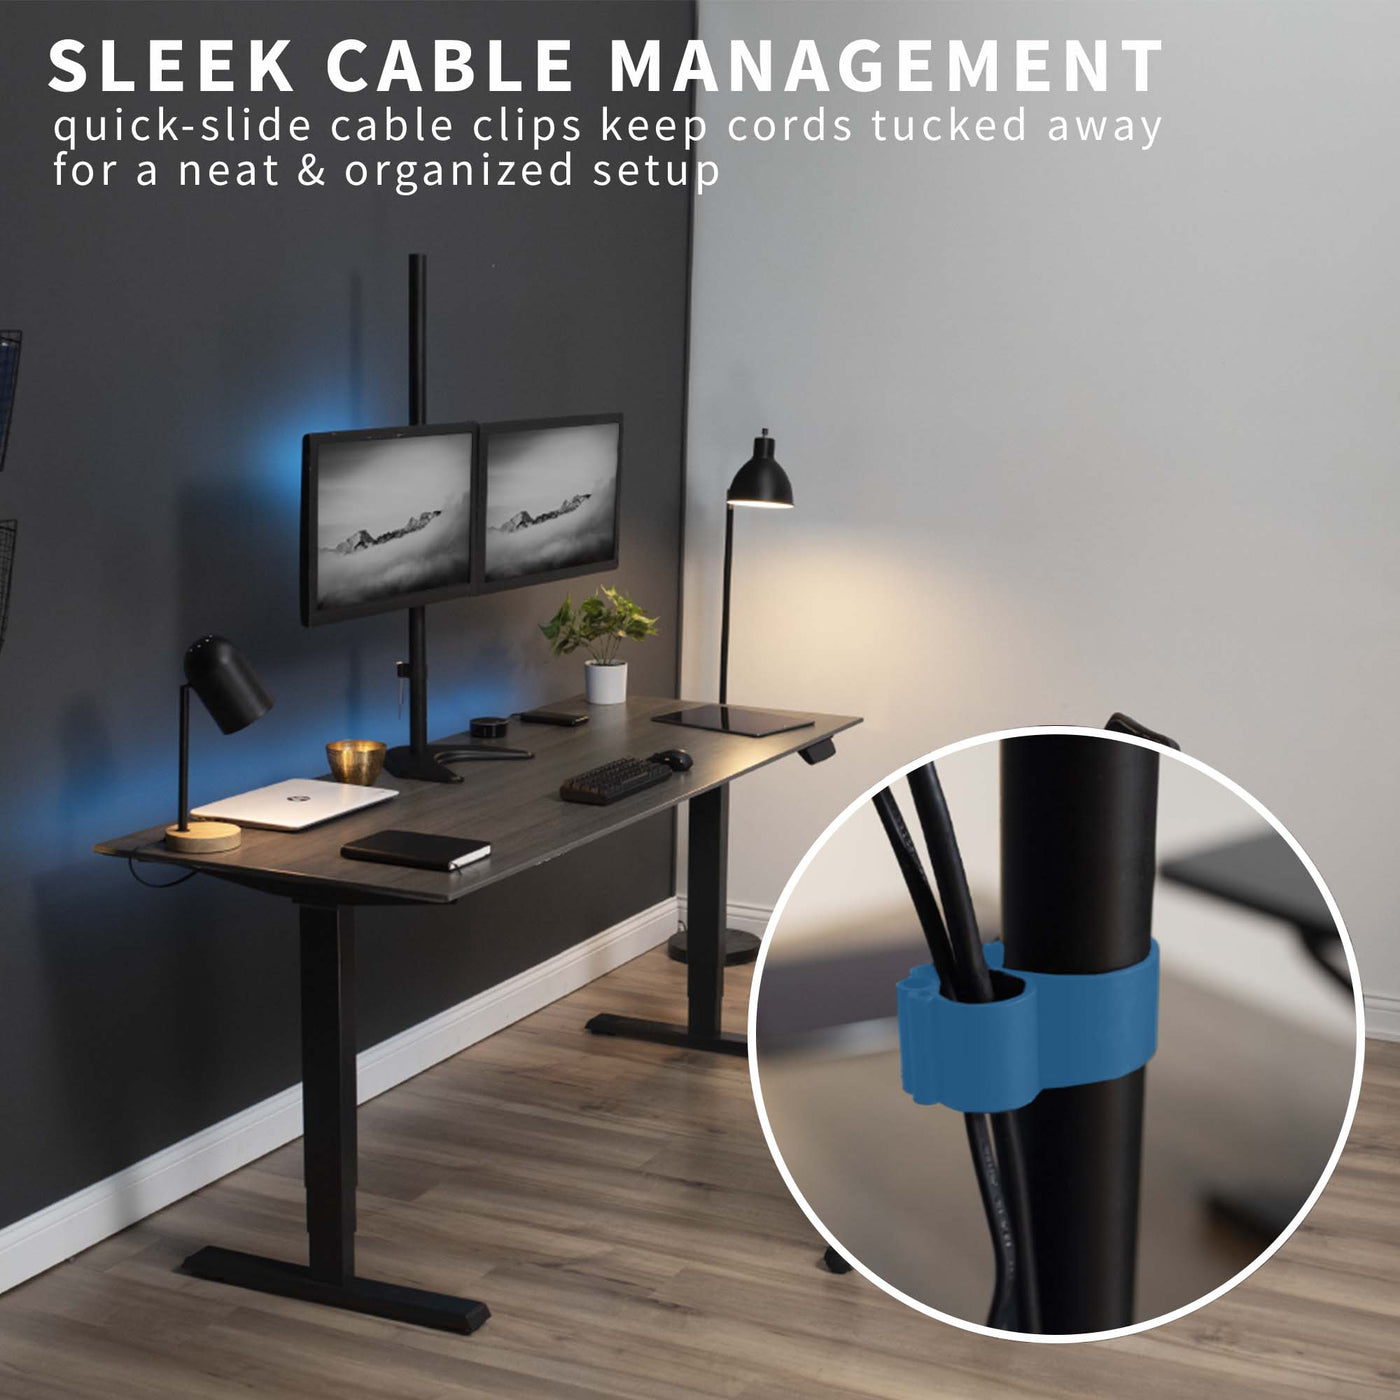 Extra tall sturdy adjustable dual monitor ergonomic desk stand for office workstation with sleek cable management.